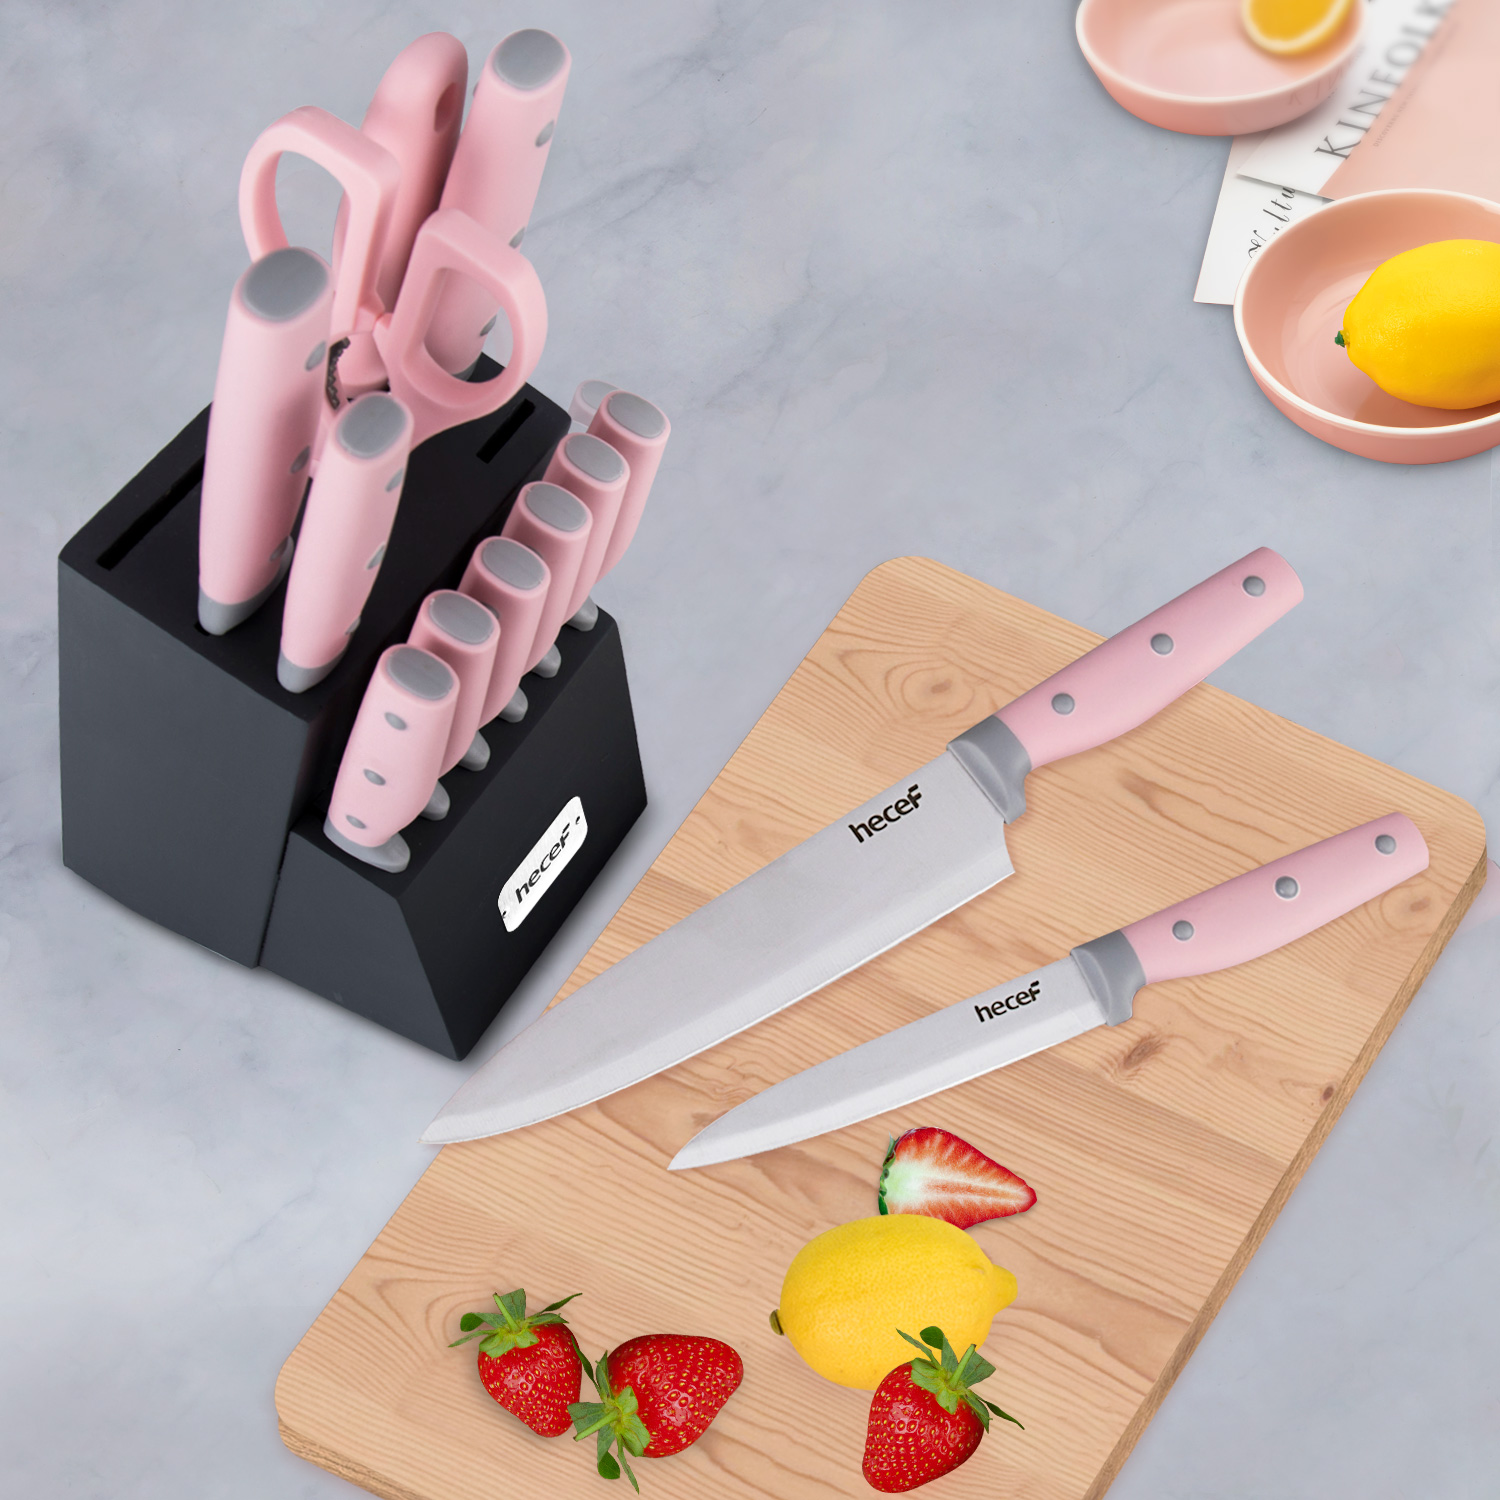 Hecef Cute Kitchen Knife Set,5-piece Non-Stick Knives Set with